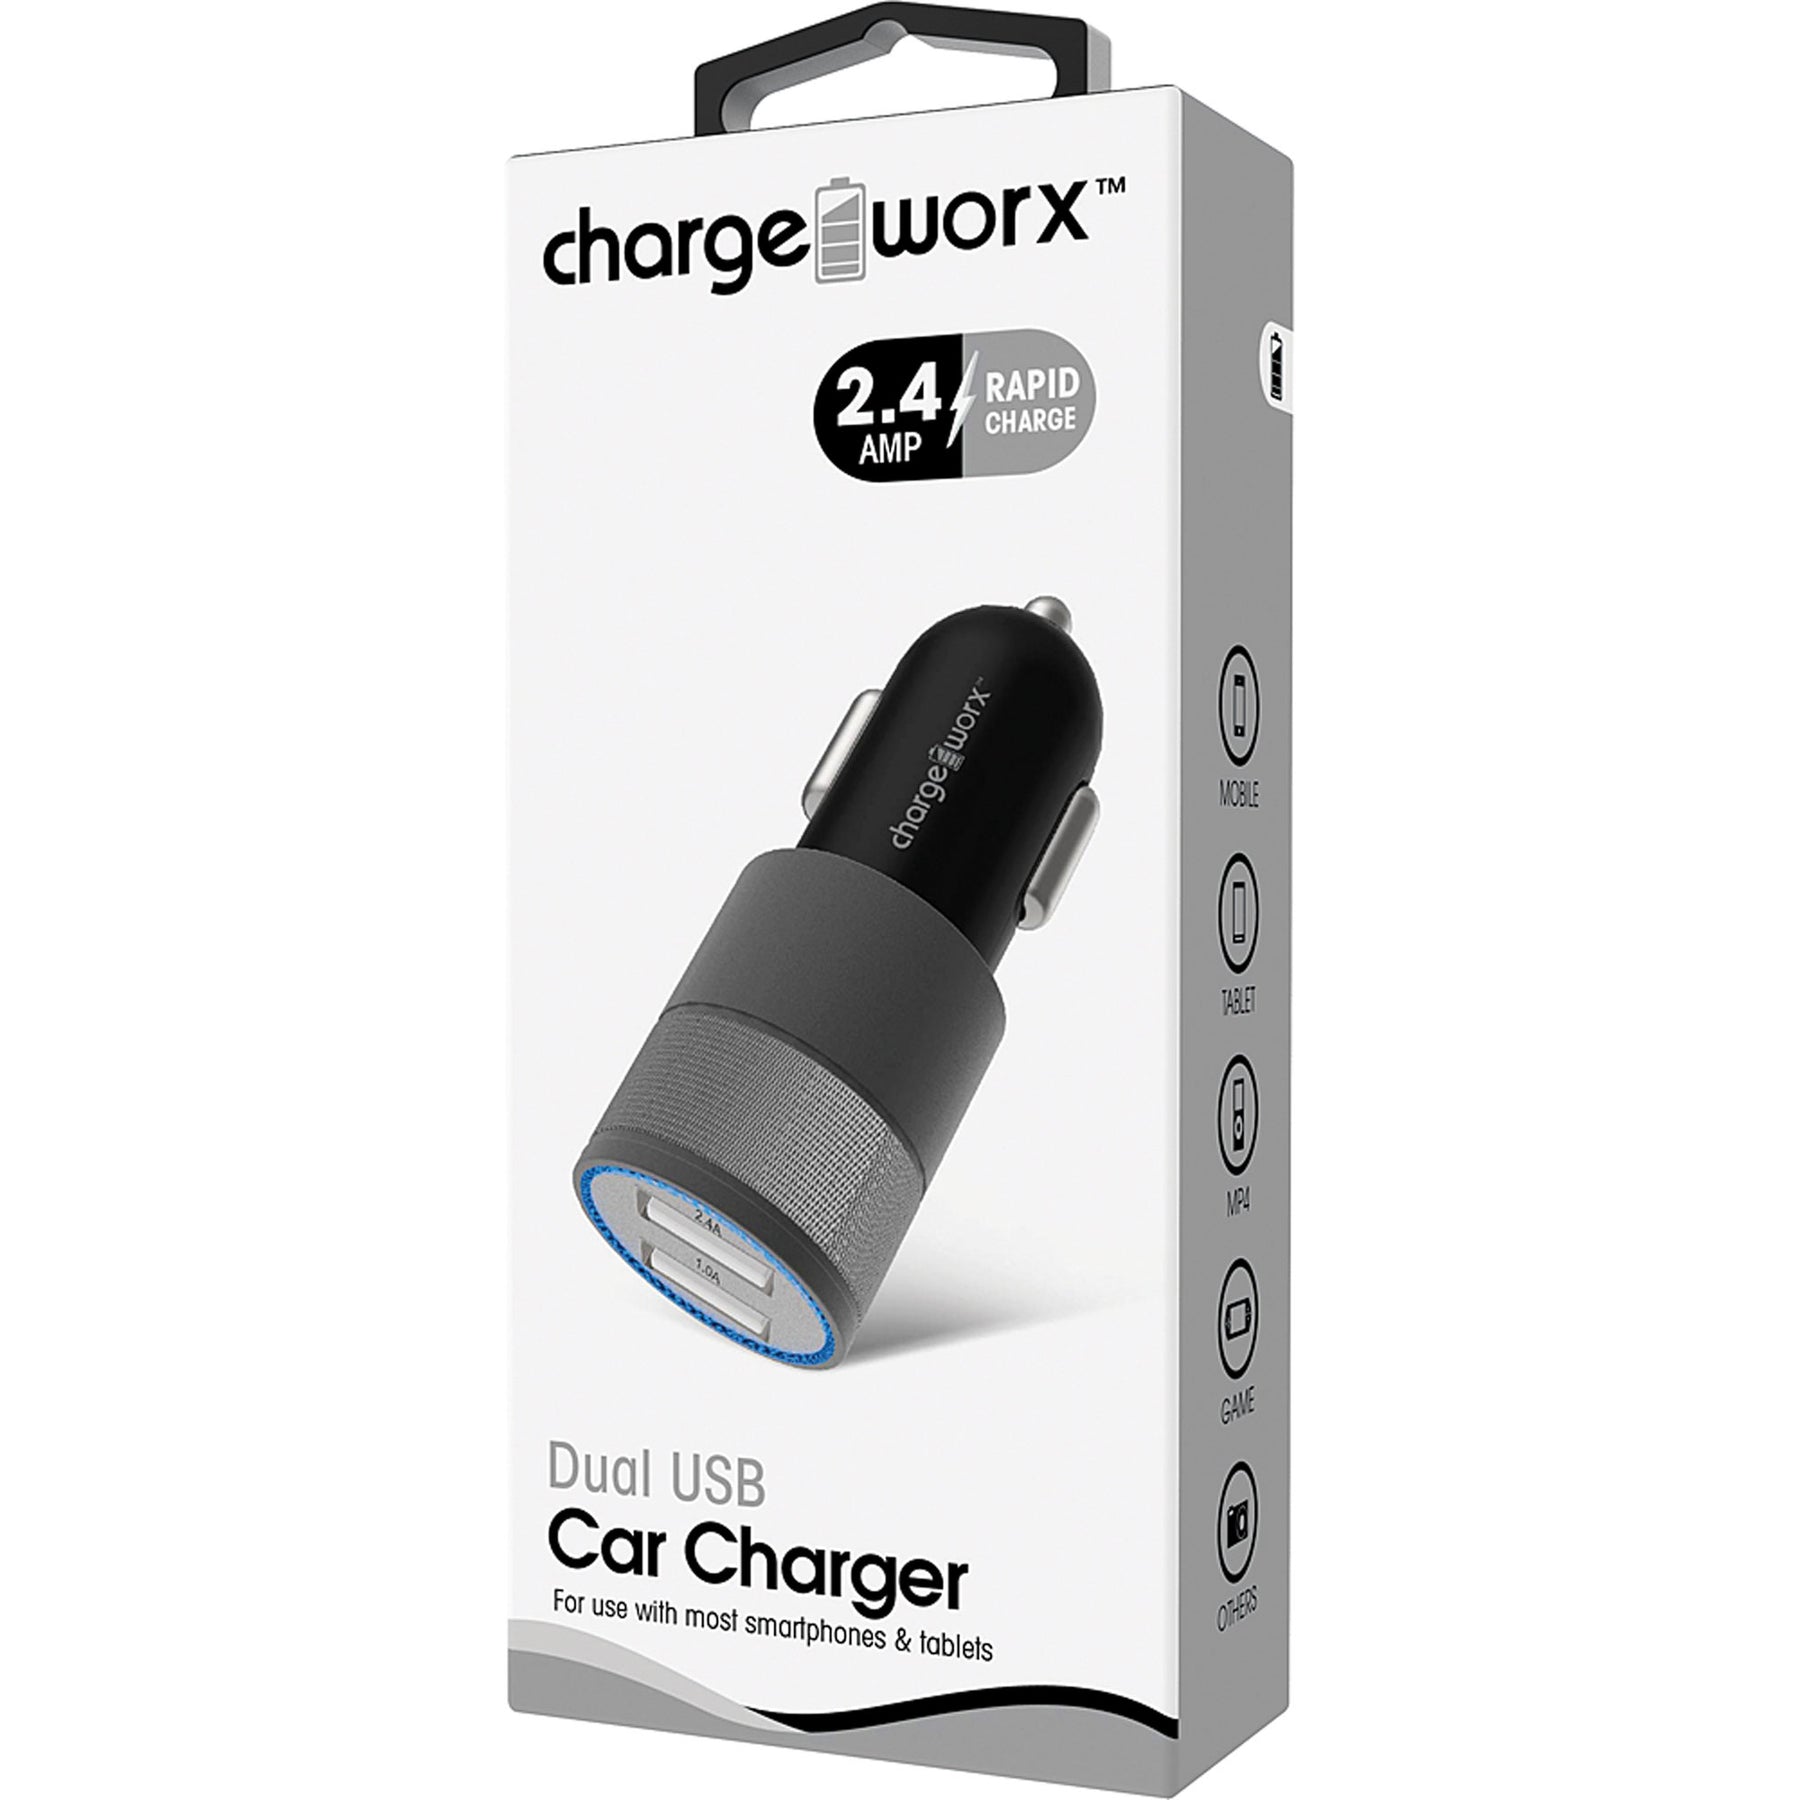 Chargeworx - 2.4 Amp Dual USB Car Adapter Charger, Black/Grey